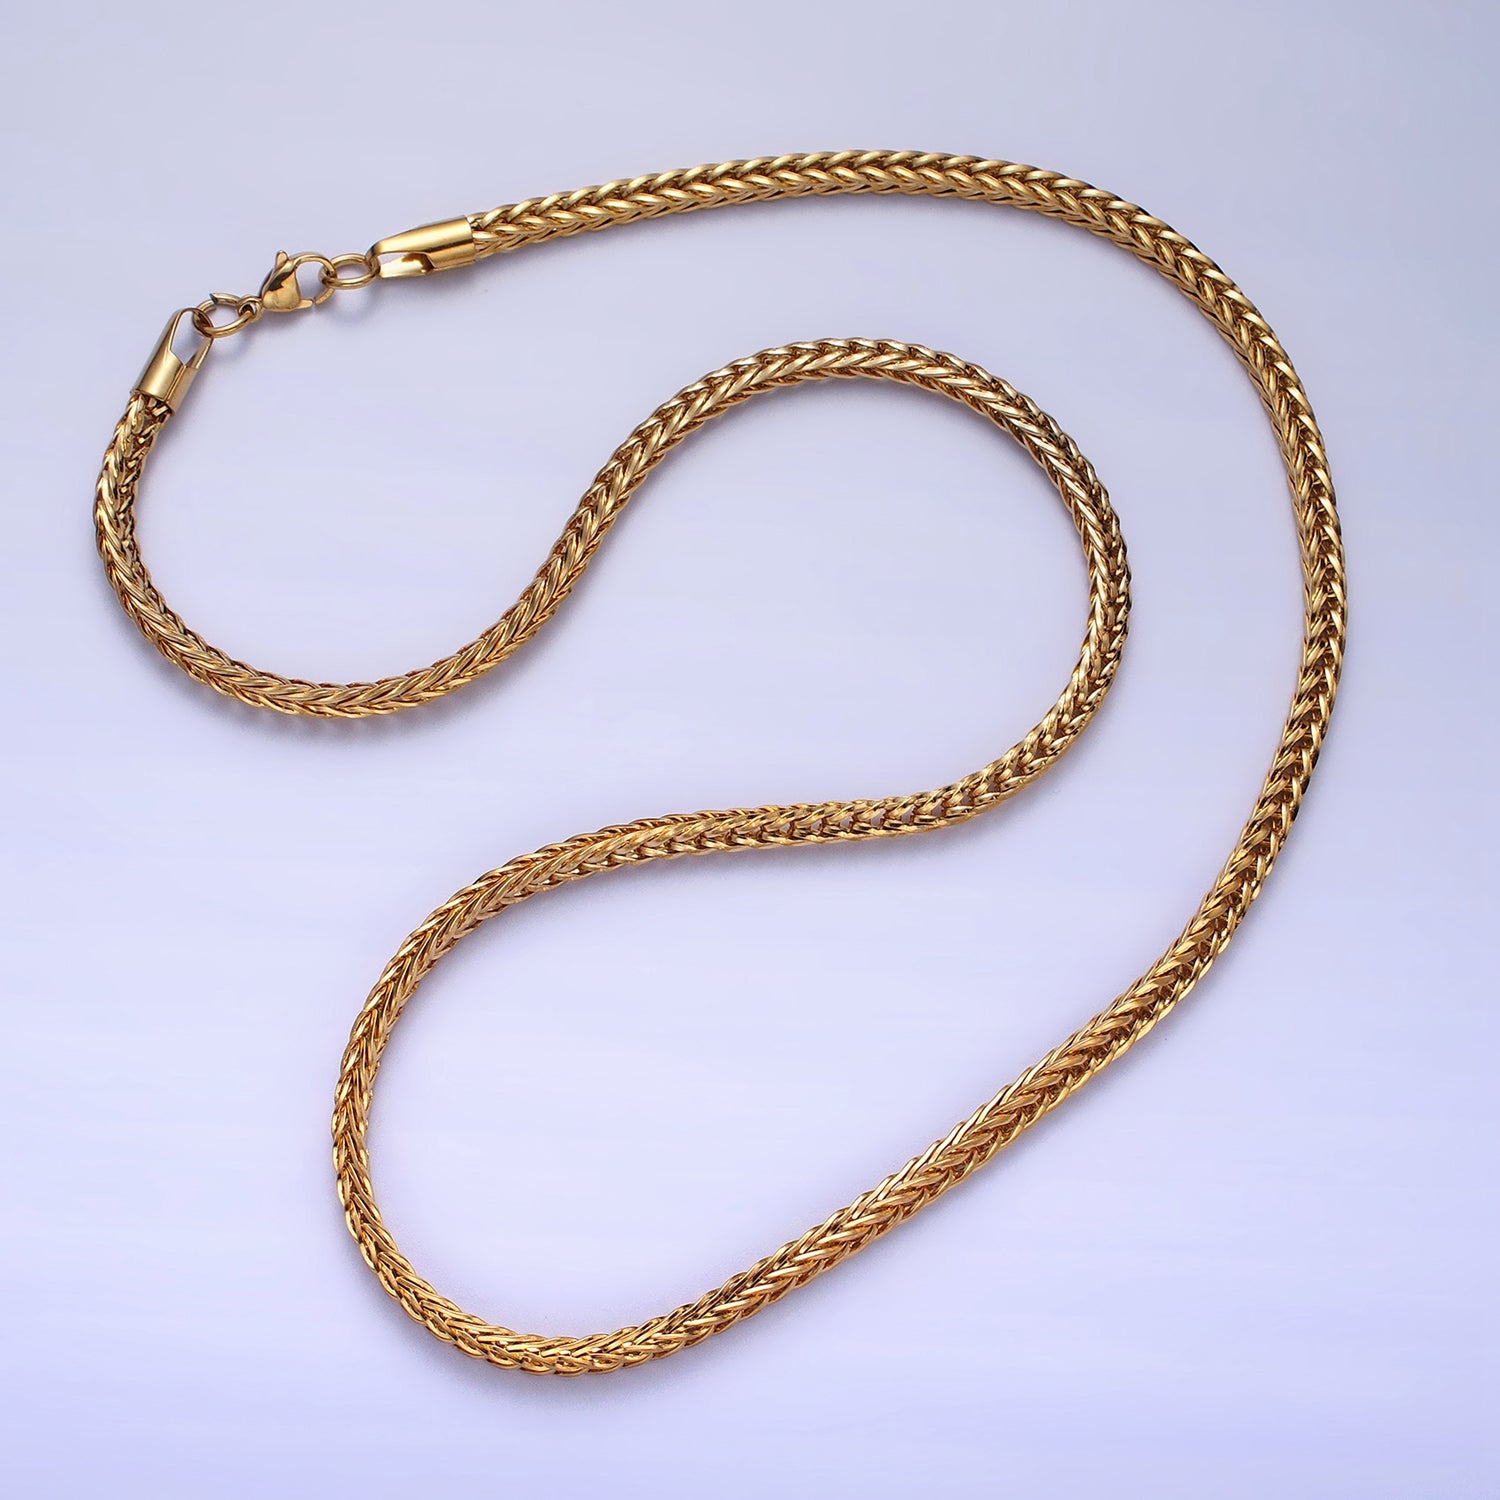 Long Gold Foxtail Chain Necklace Stainless Steel 4.2mm Thick Men's Chain 23.5 inch Necklace WA-1625 WA-1626 - DLUXCA